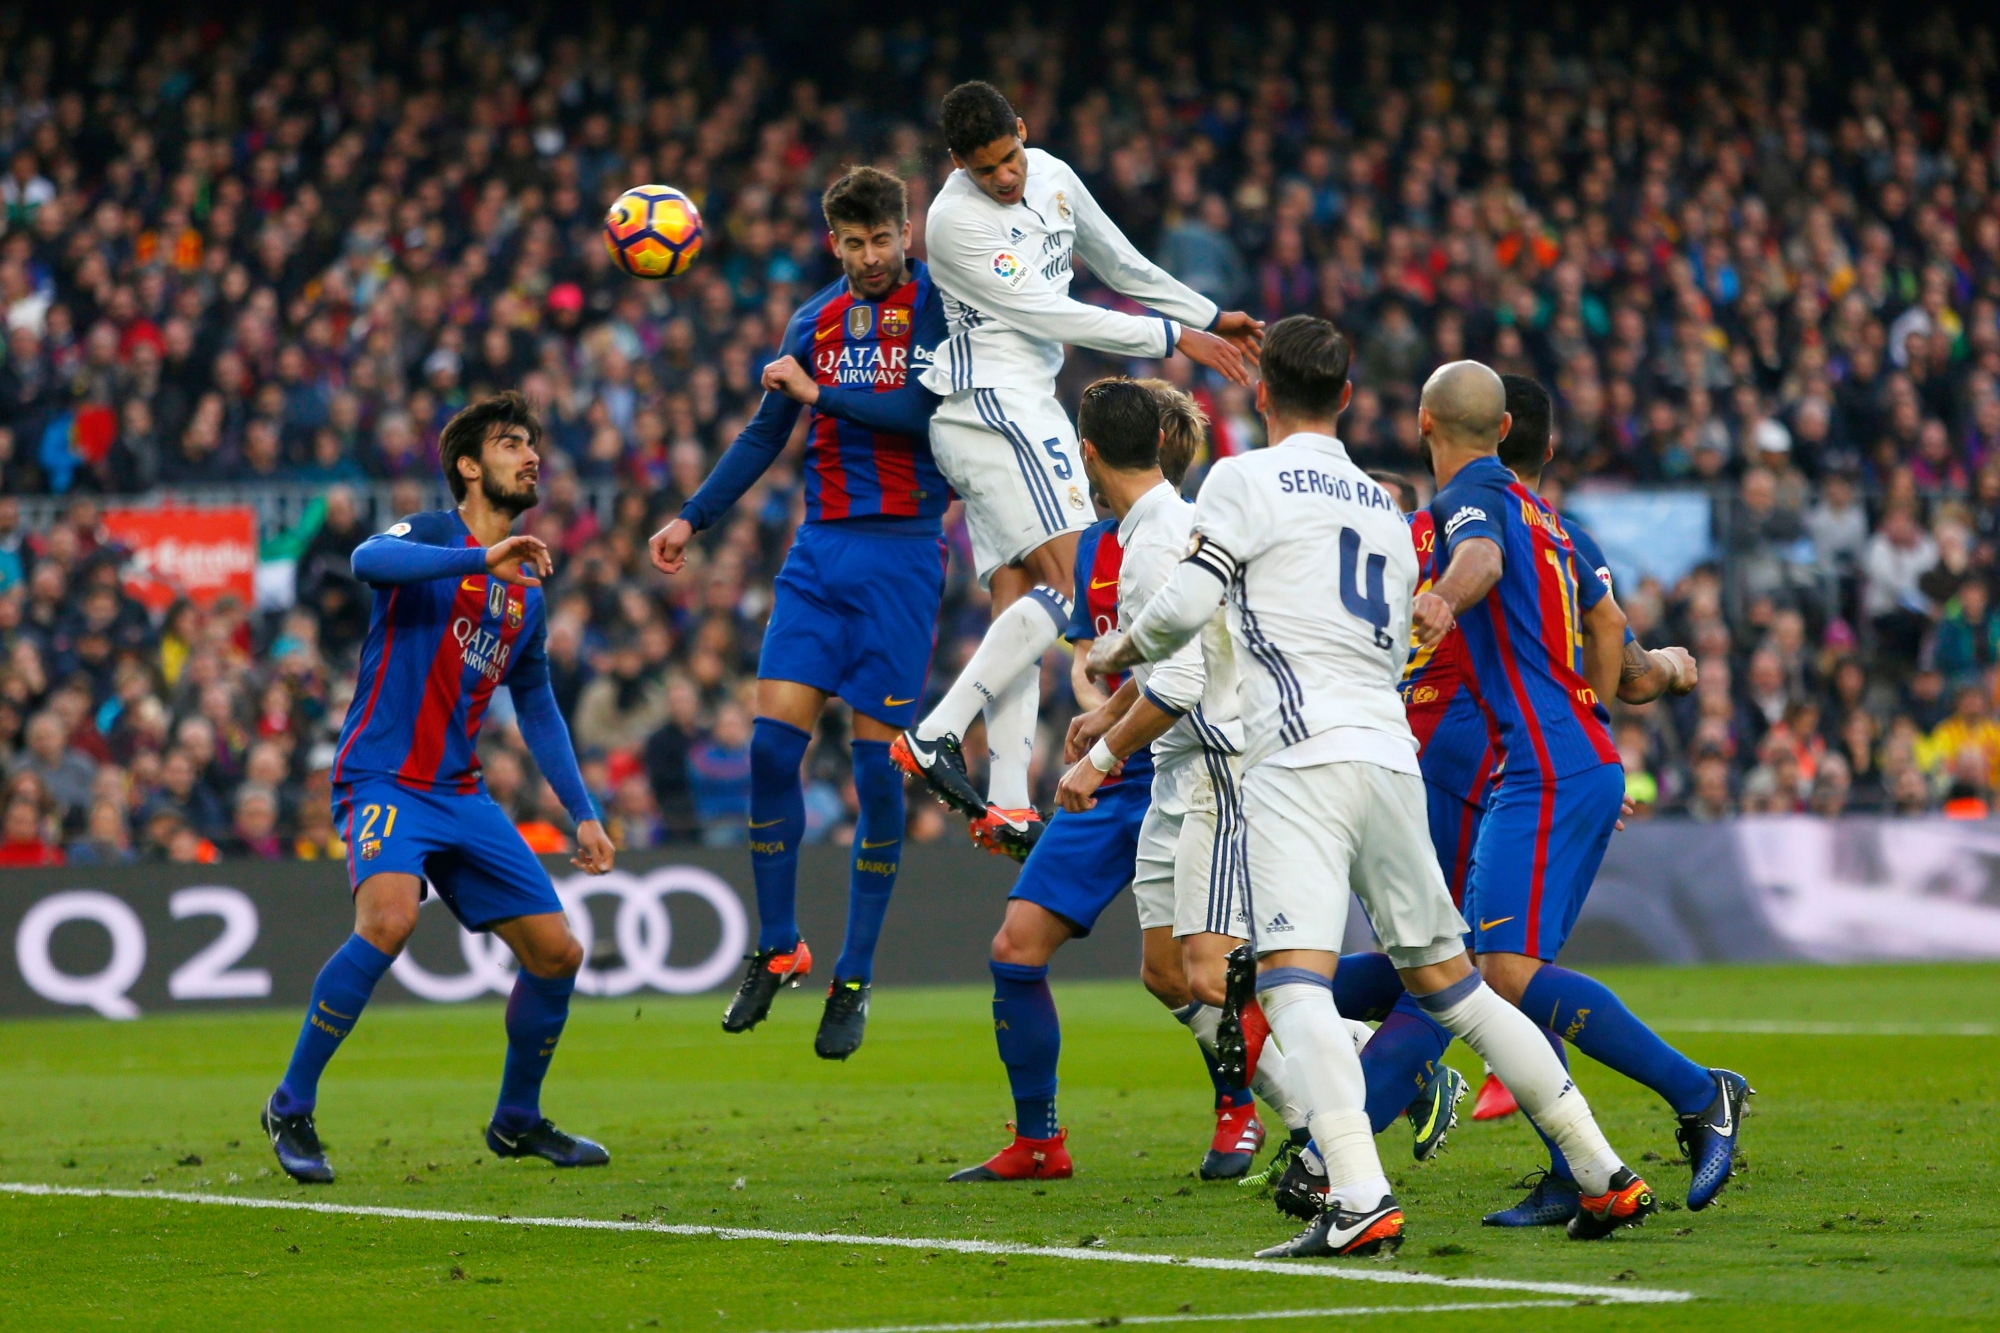 Real Madrid's Varane, top, goes for a header with Barcelona's Gerard Pique, top left, during the Spanish La Liga soccer match between FC Barcelona and Real Madrid at the Camp Nou stadium in Barcelona, Spain, Saturday, Dec. 3, 2016. The match ended in a 1-1 draw. (AP Photo/Francisco Seco) SPANIEN FUSSBALL BARCELONA REAL MADRID